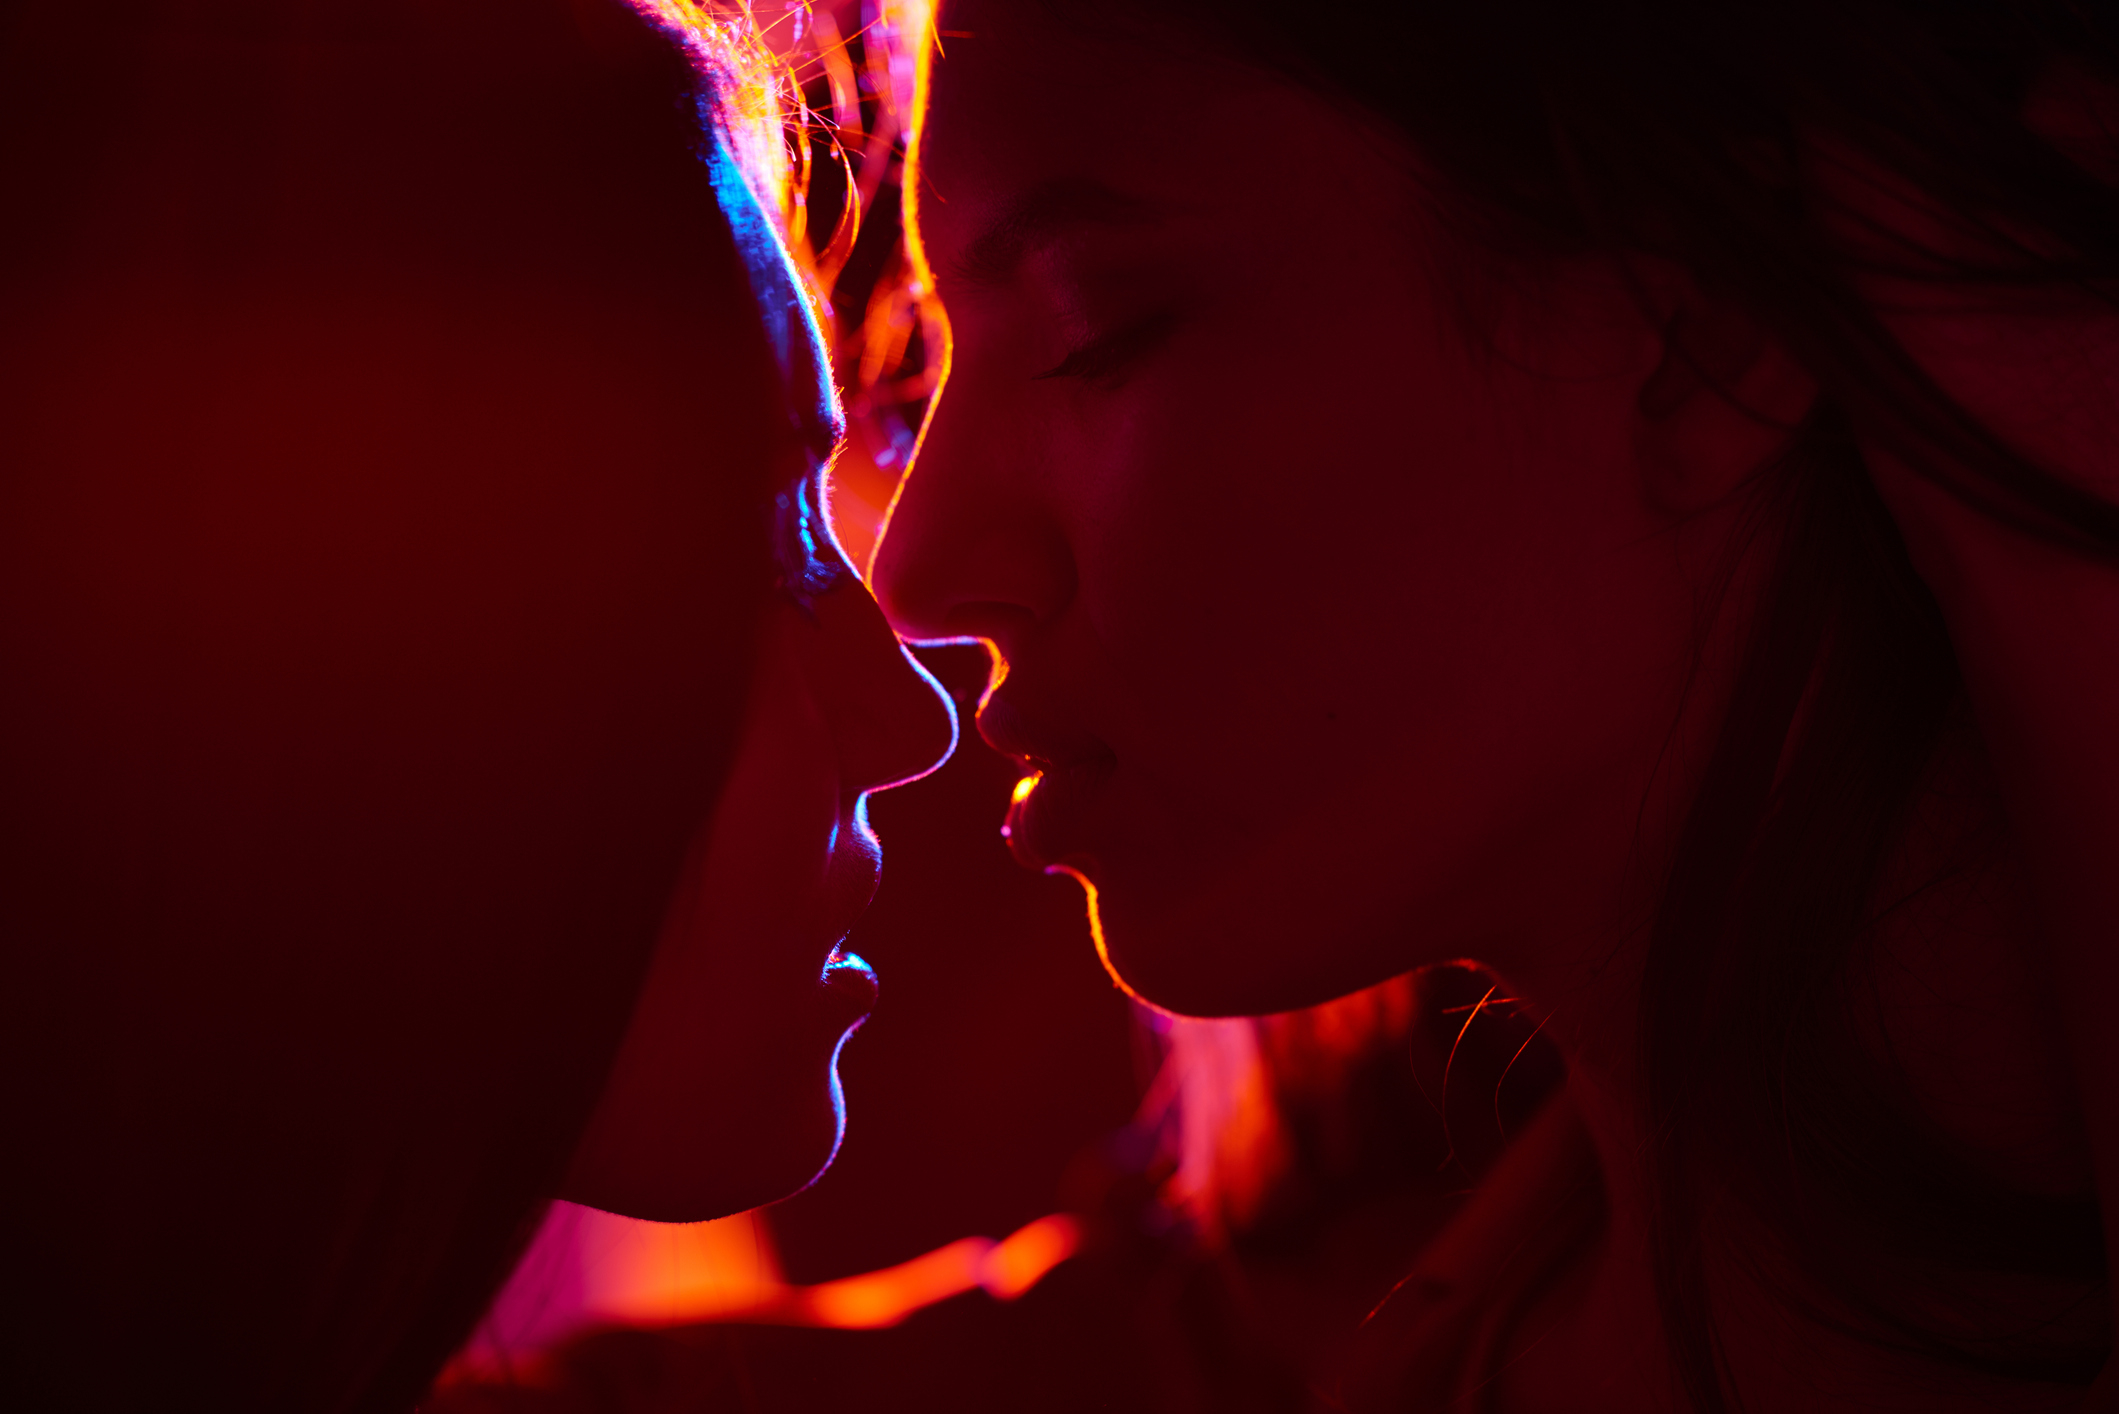 Two people close to kissing, with a vibrant backlight. Their expressions suggest intimacy